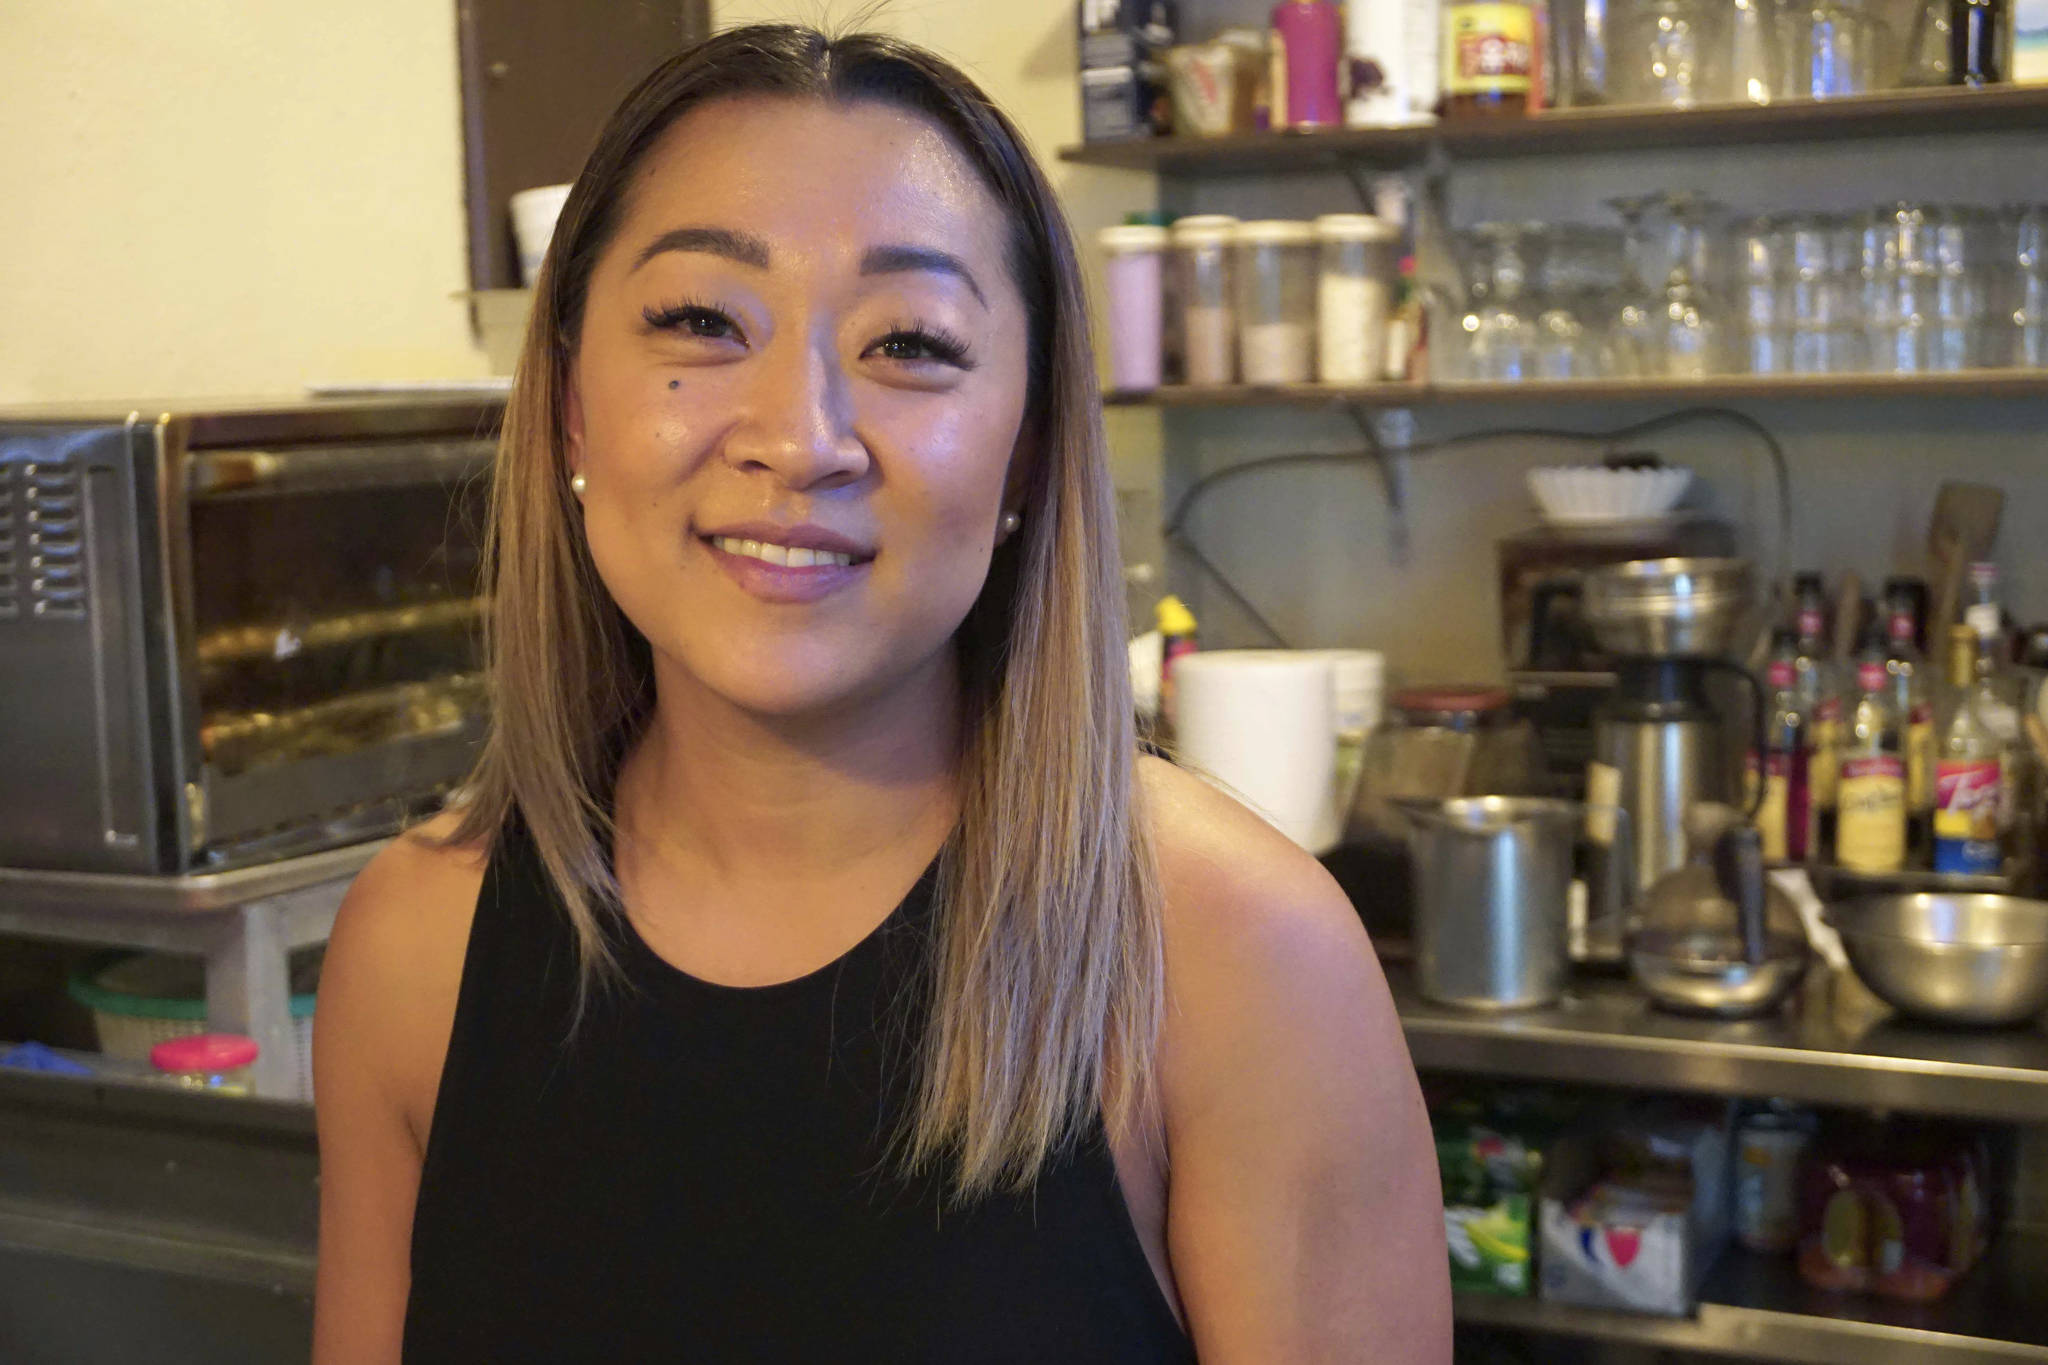 Phnom Penh Noodle House co-owner Dawn Ung grew up in the restaurant, and took it over to carry on the “family legacy.” Photo by Melissa Hellmann